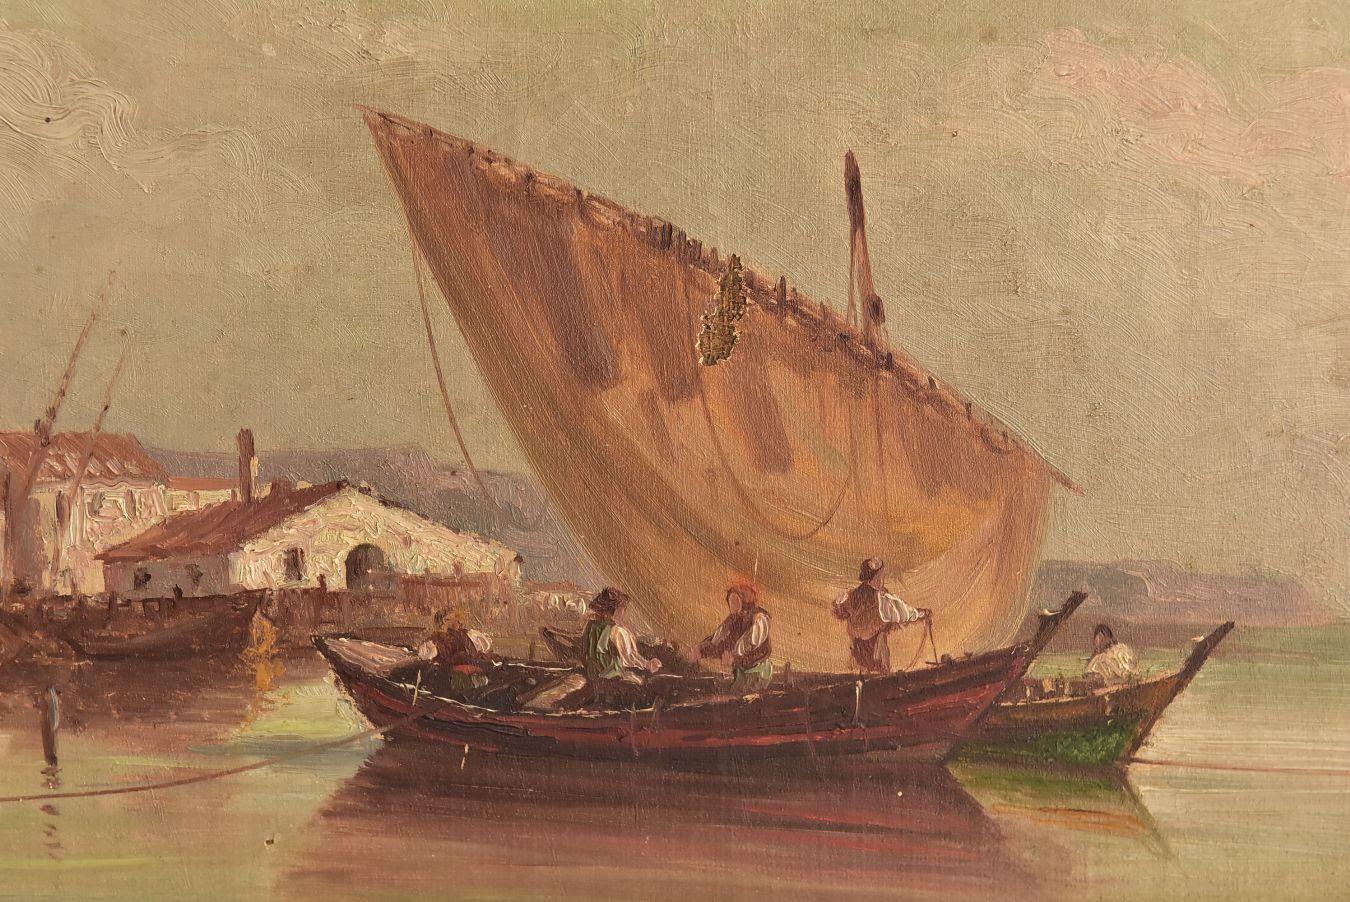 Late 19th Marine oil painting representing a fishing boat at the harbor with houses by Paul Seignon (1820-1890) dimension 42 cm by 27 cm.